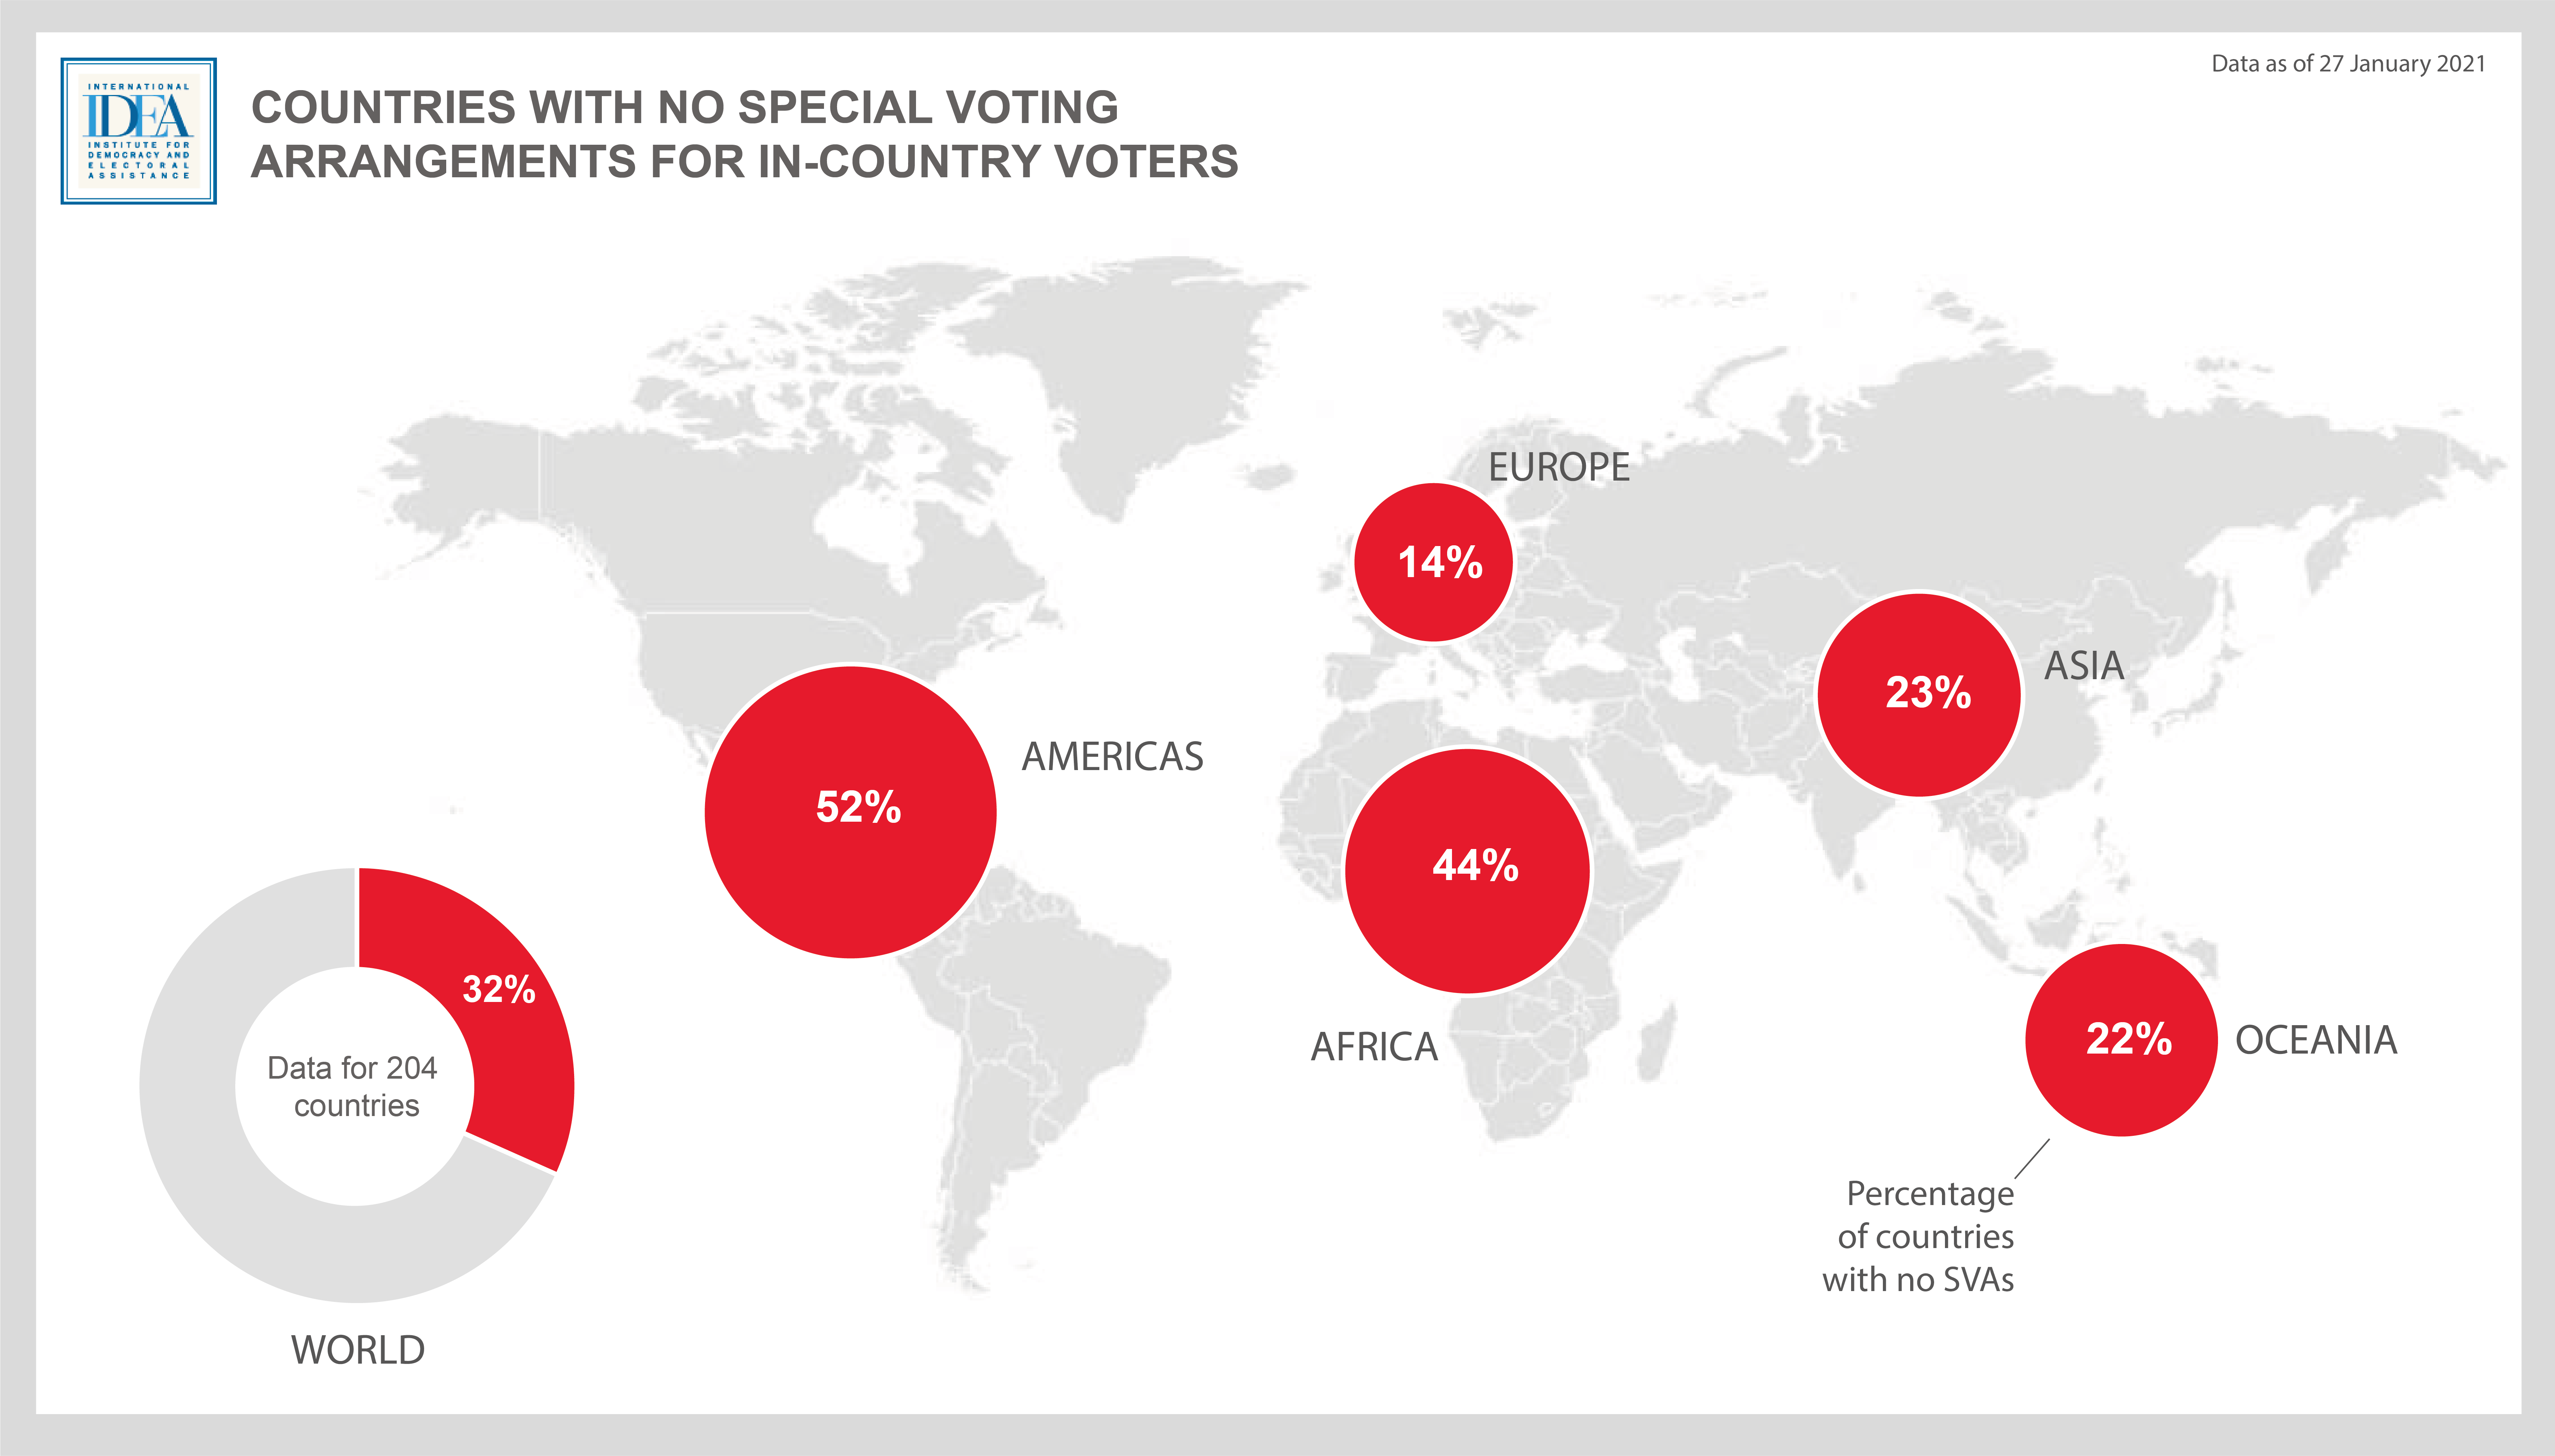 Figure 3: Countries with no special voting arrangements for in-country voters.